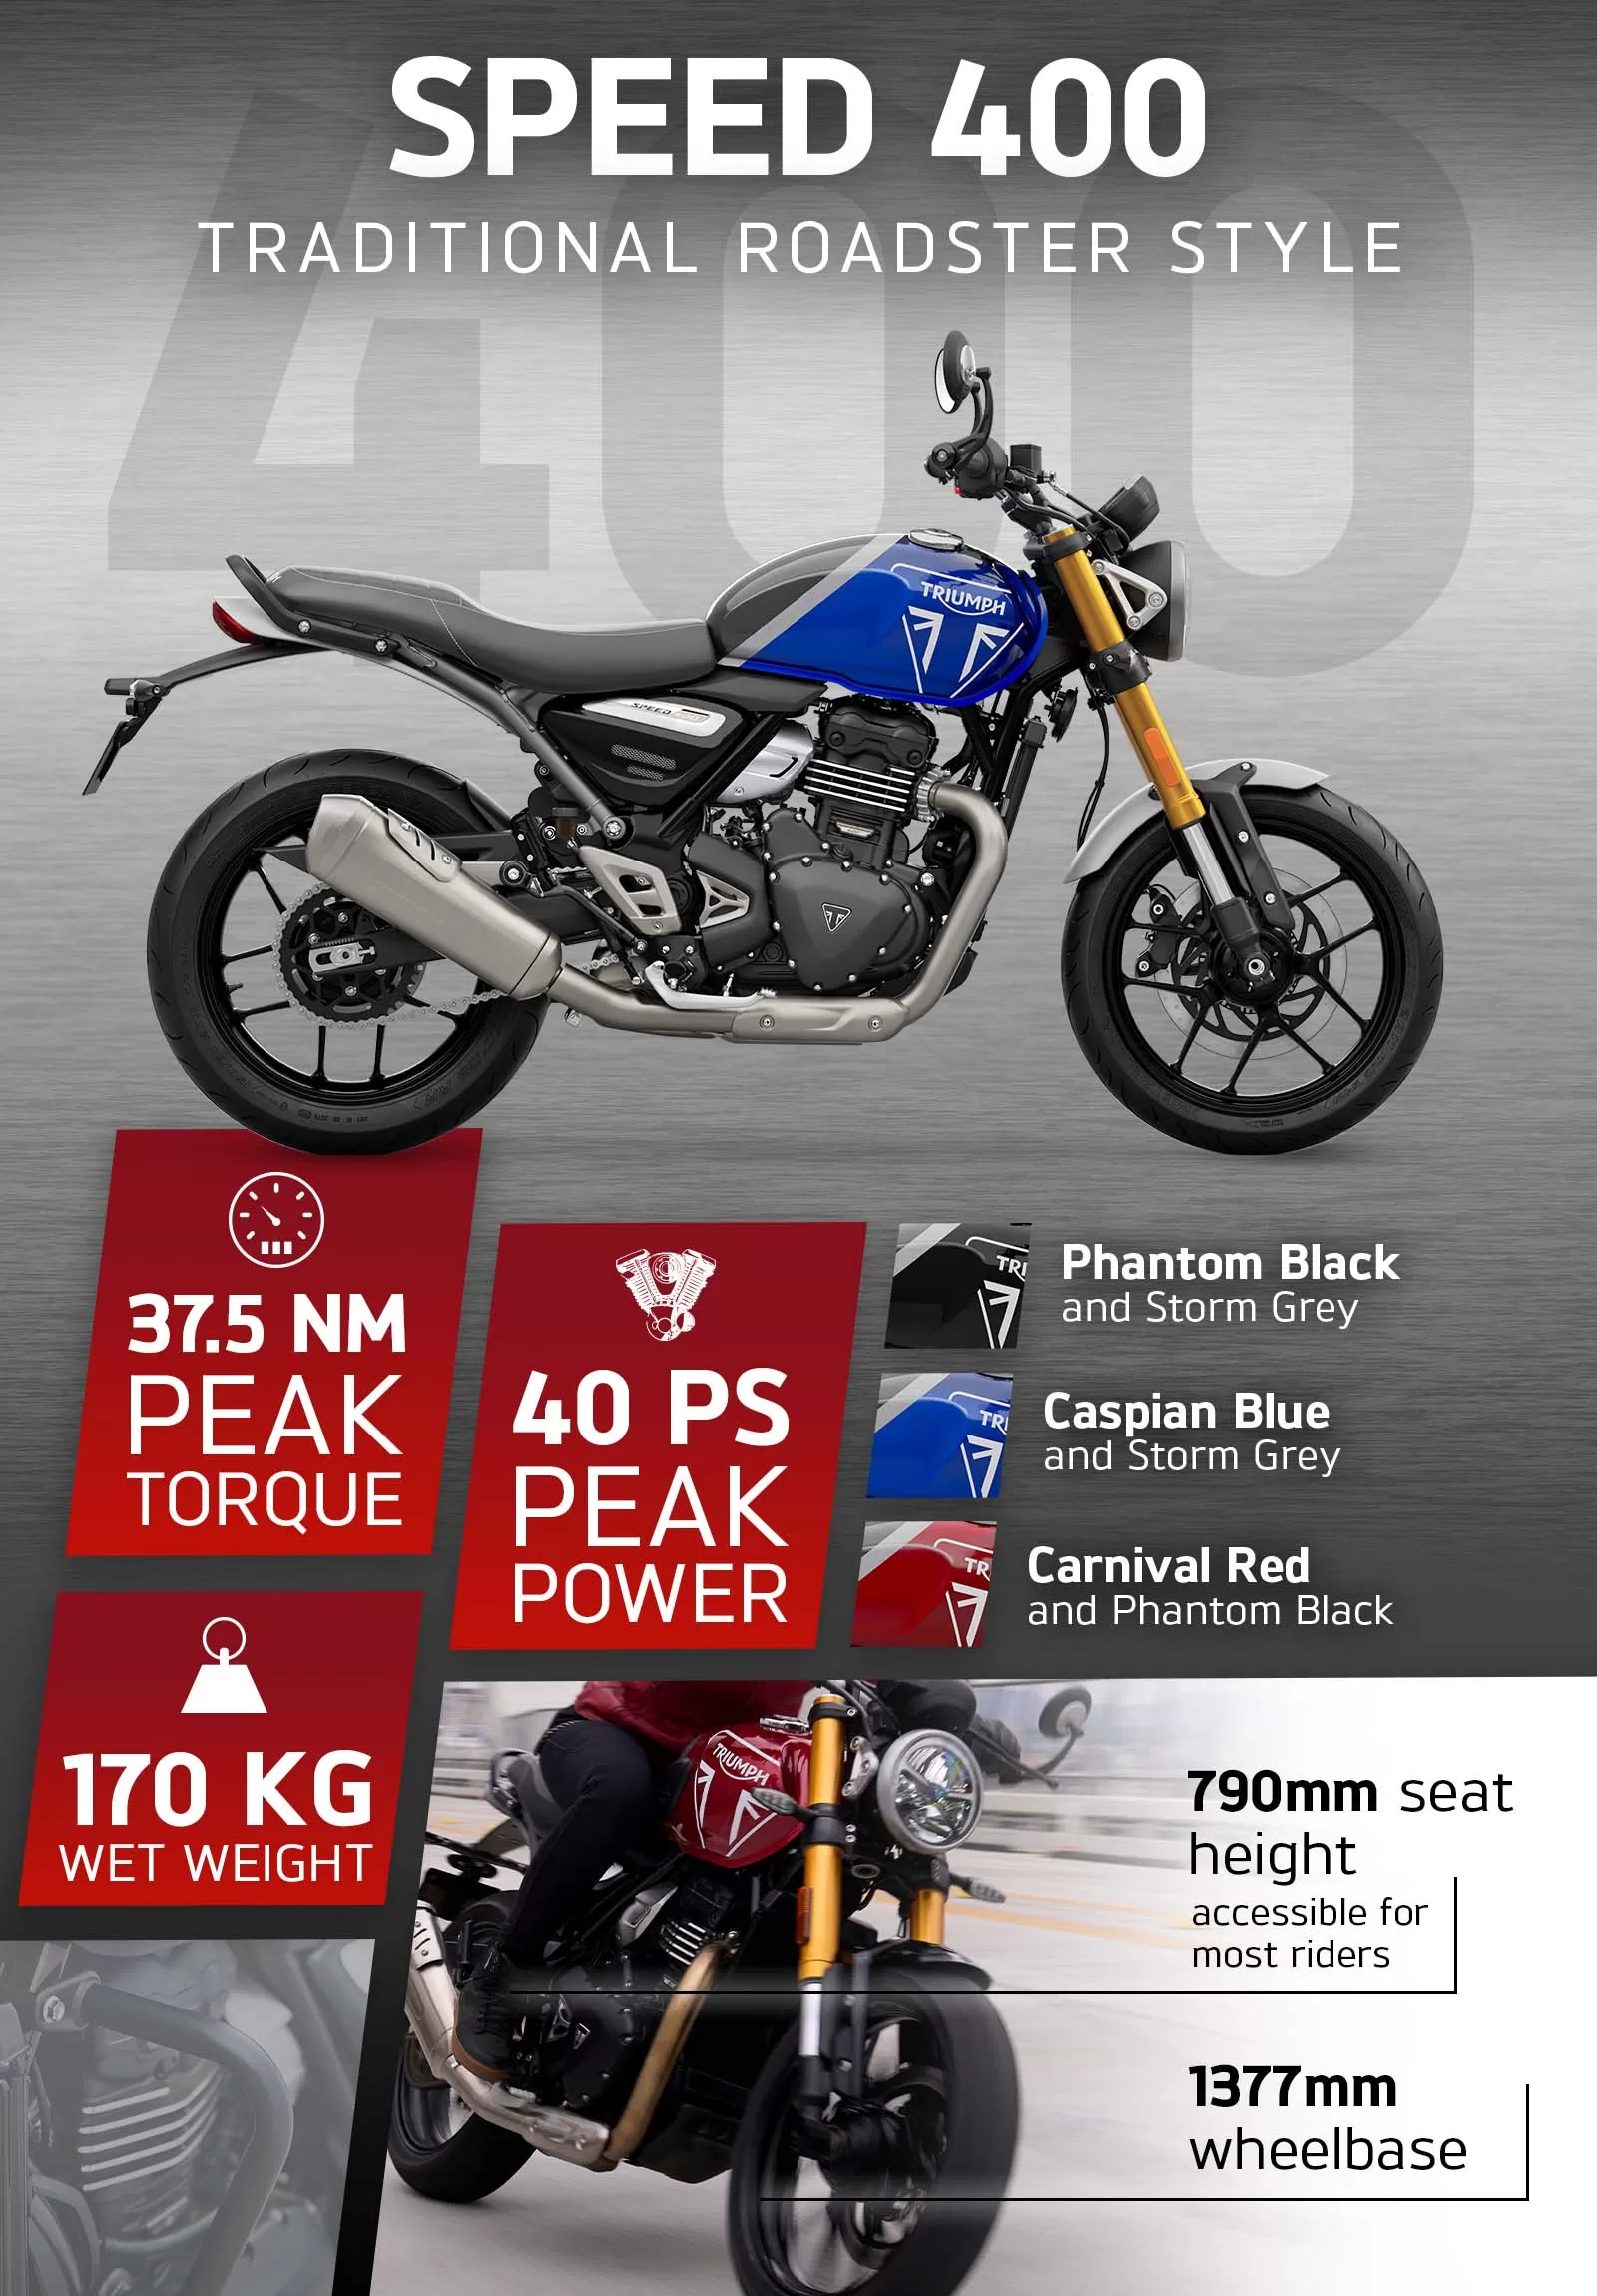 Speed 400 / Traditional roadster style / 790mm seat height / Three colours will be offered: Carnival Red, Phantom Black, or Caspian Blue / 1377mm wheelbase / 40 PS PEAK POWER / 37.5 NM PEAK TORQUE / More power than key rivals / Wet weight of only 170kg